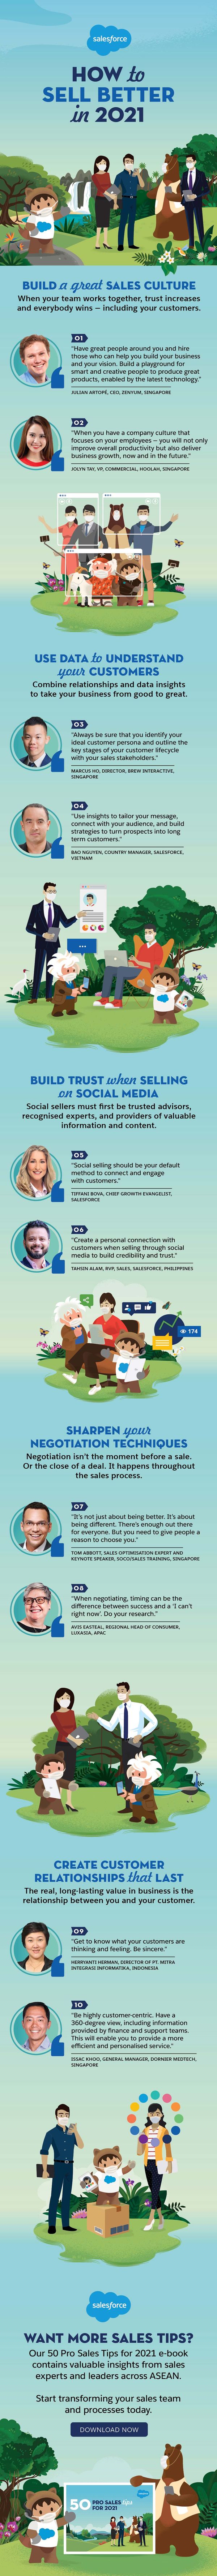 Salesforce How to Sell Better Infographic